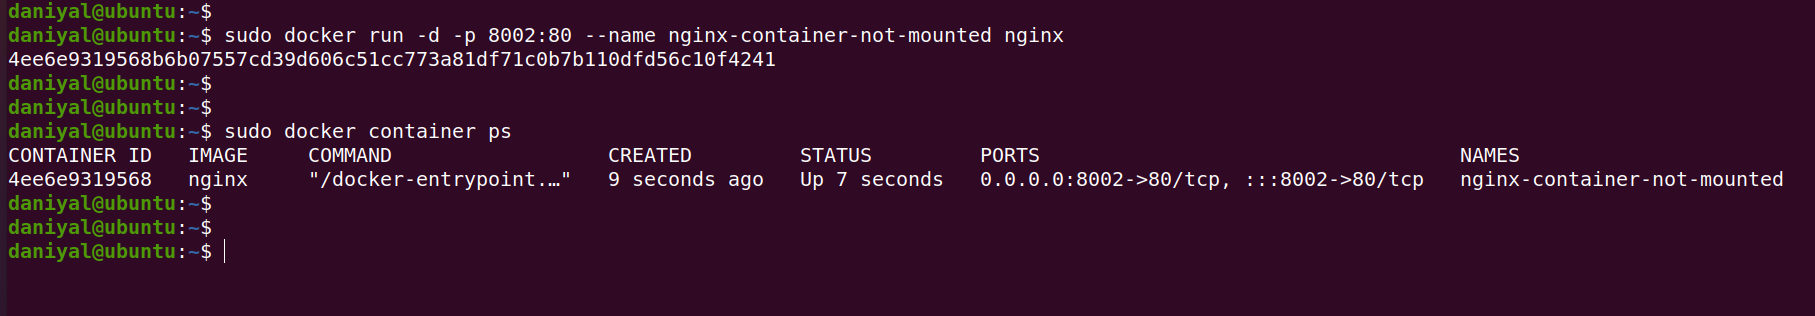 Running Nginx Container Without Mounting Volume in Docker Container